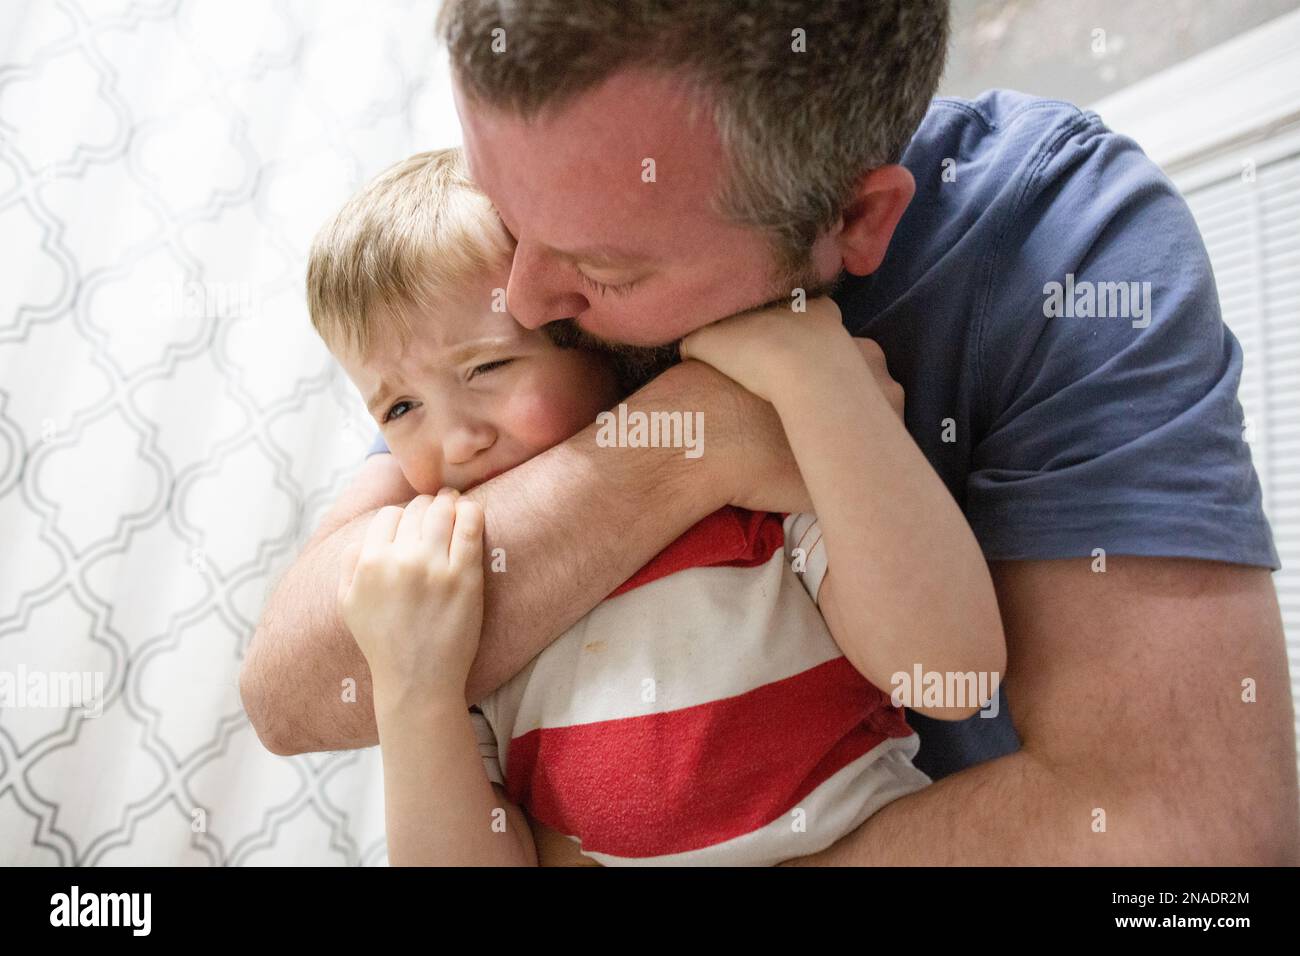 Dad Kisses the Cheek of Upset Son During Bedtime Routine Stock Photo